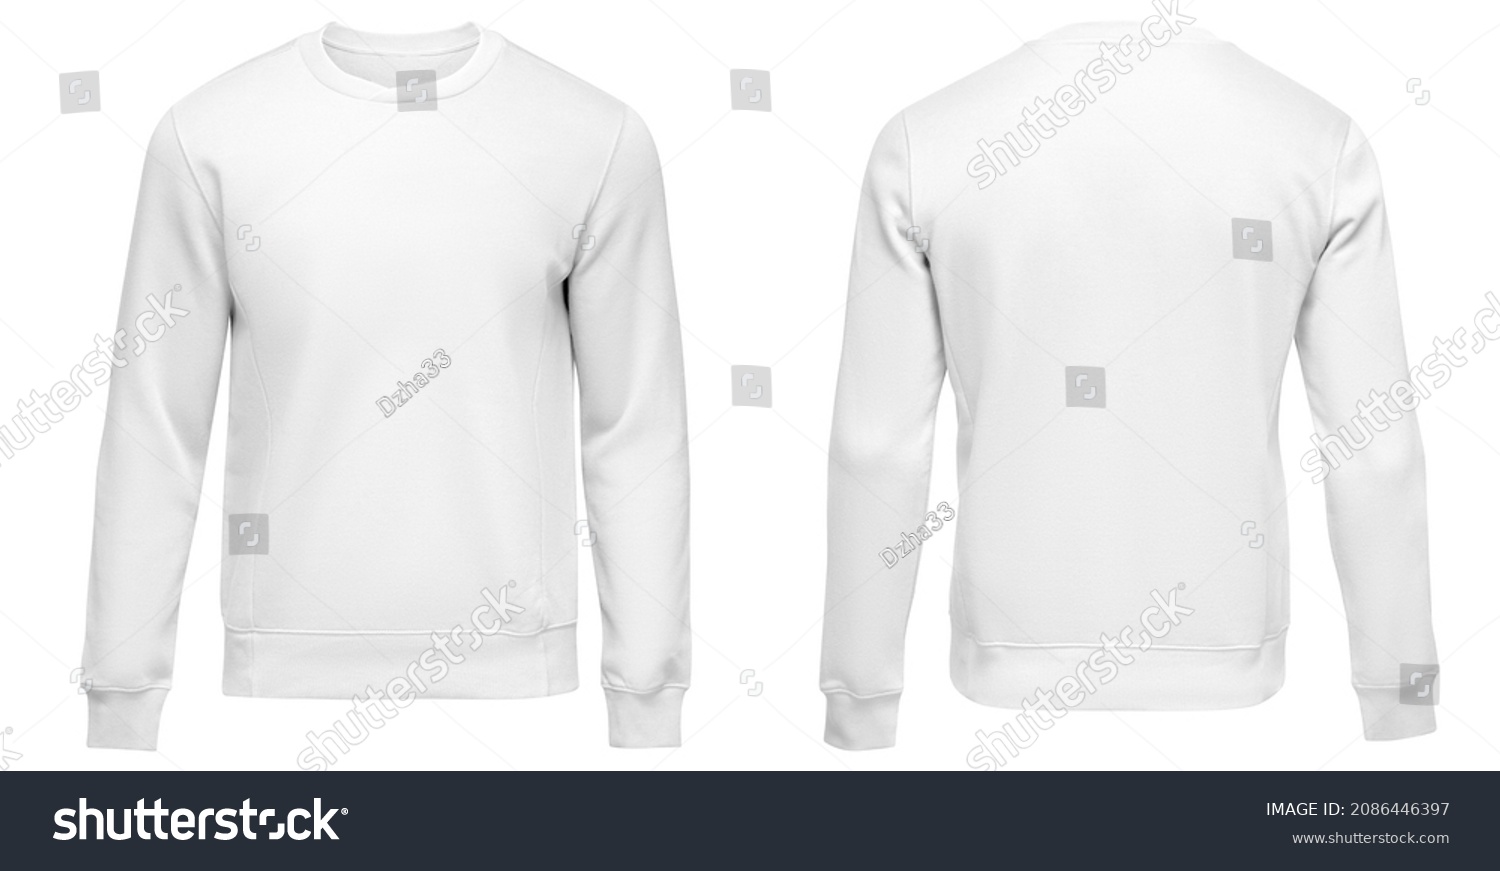 White sweatshirt template. Pullover blank with long sleeve, mockup for design and print. Sweatshirt front and back view isolated on white background #2086446397